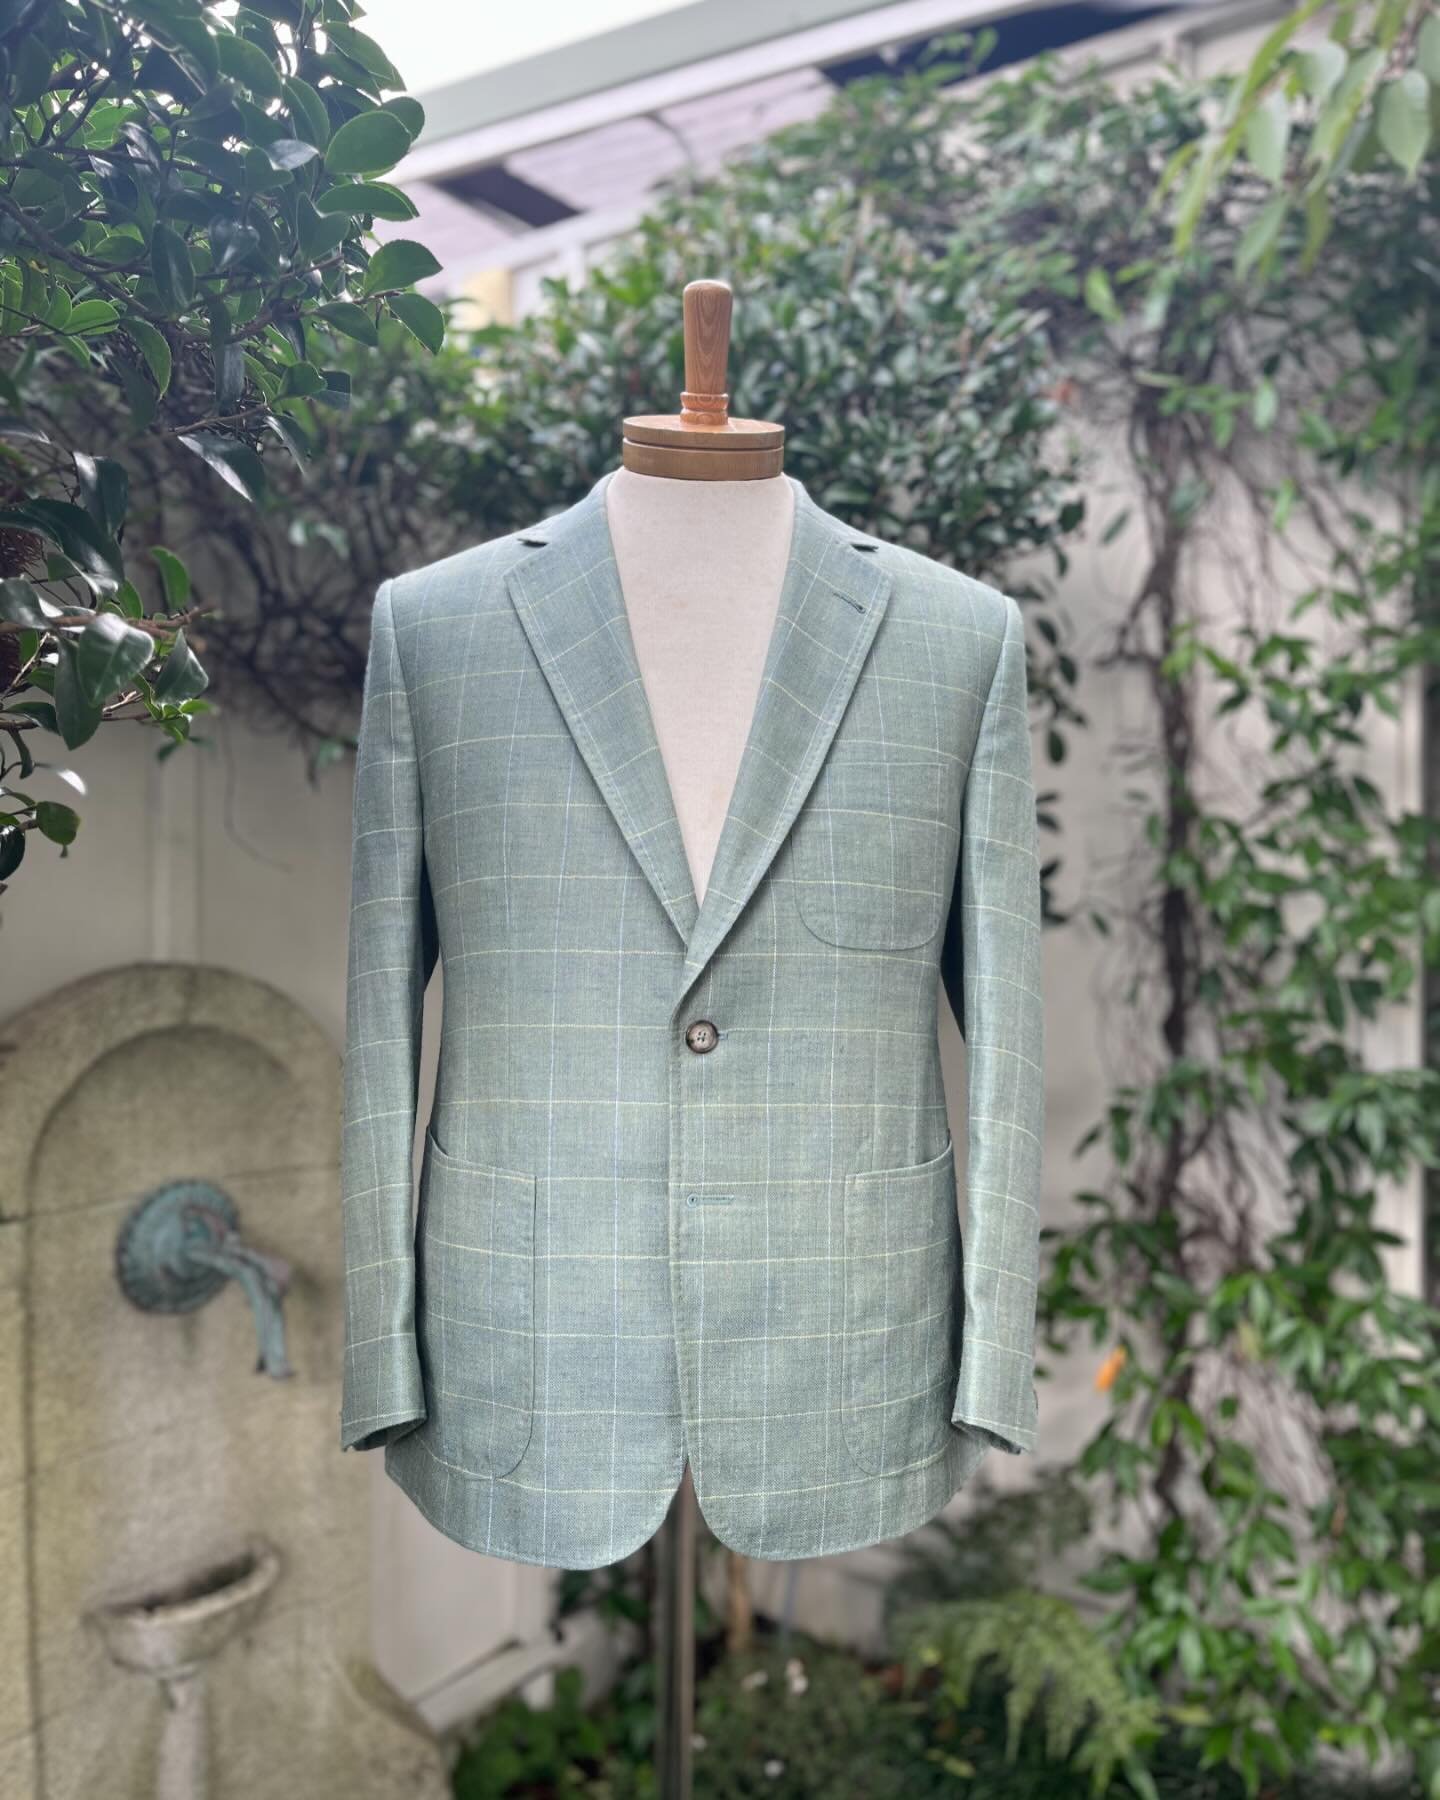 Timeless Classic - windowpane check. I can imagine so many ways to accessorise this.

@standeven1885 silk wool linen.

#bespoke #nzmade #bespoketailor #tailoring #bespoketailoring #tailor #menswear #fashion #nzgroom #nzwedding #nzbrideandgroomshow